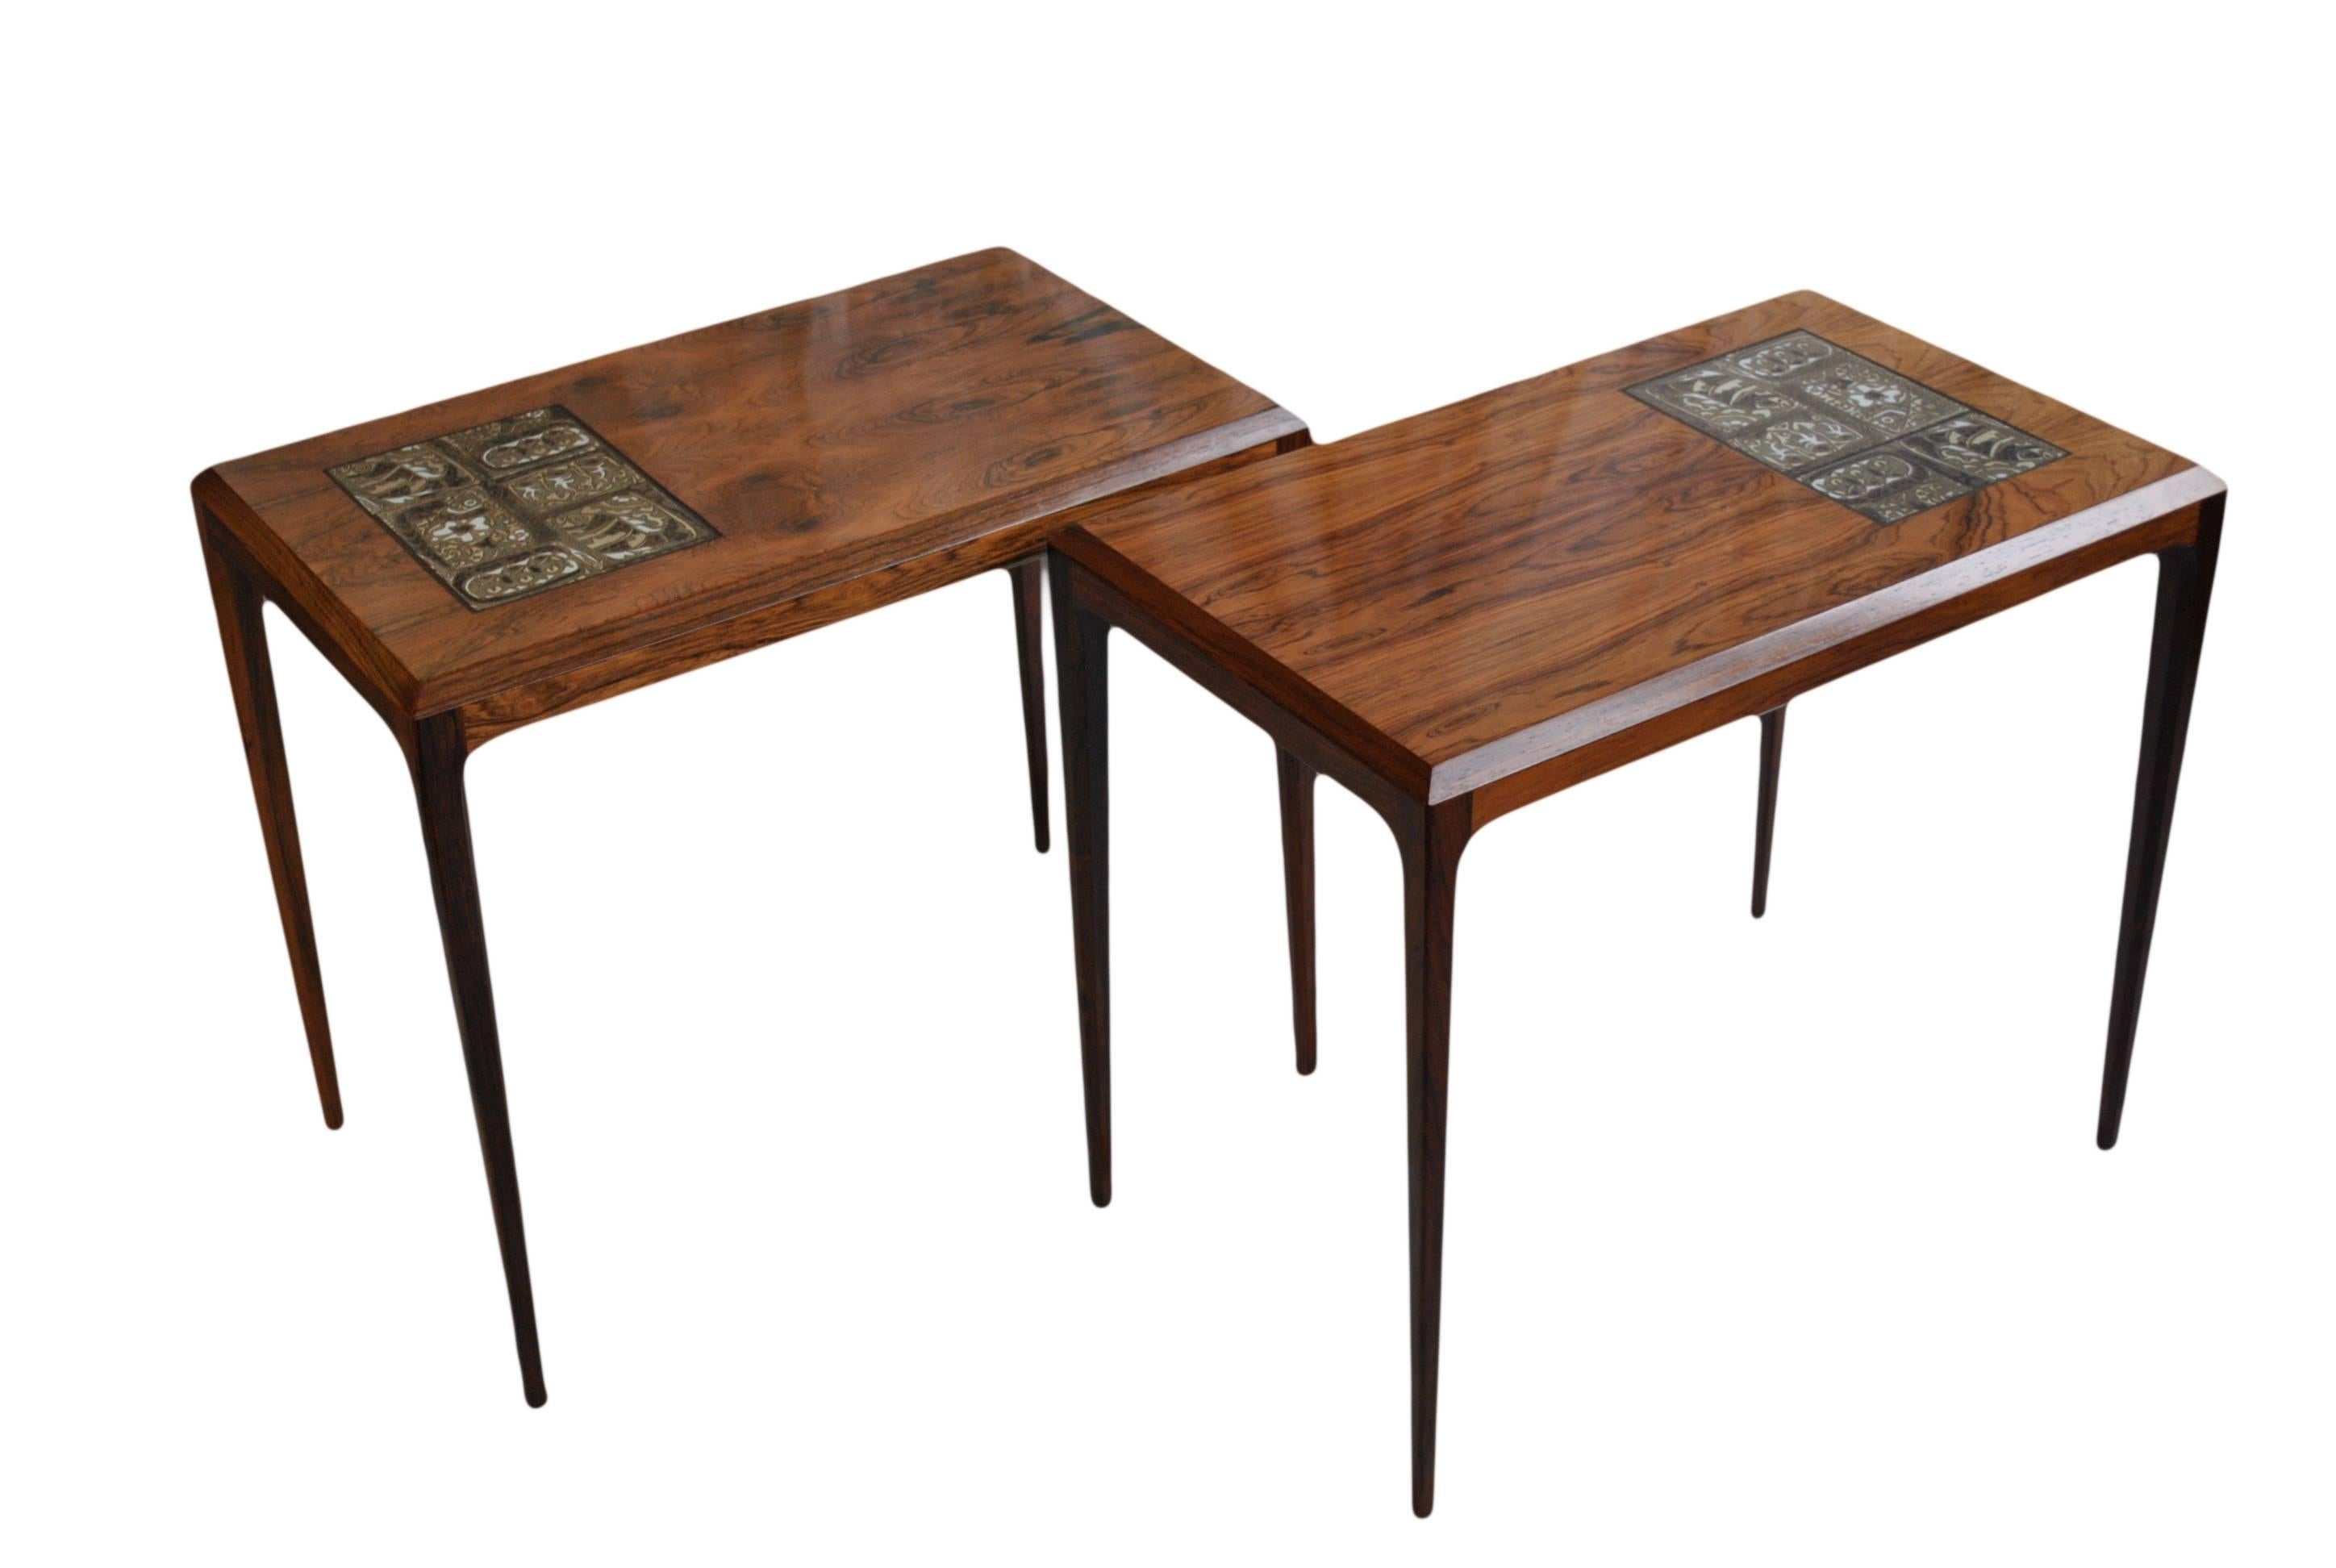 Beautiful matching pair of end tables or nightstands designed by Johannes Andersen for CFC Silkeborg. Produced in the early 1960s, Denmark. Superb rosewood with inset Royal Copenhagen tile detail.
Wonderful condition.